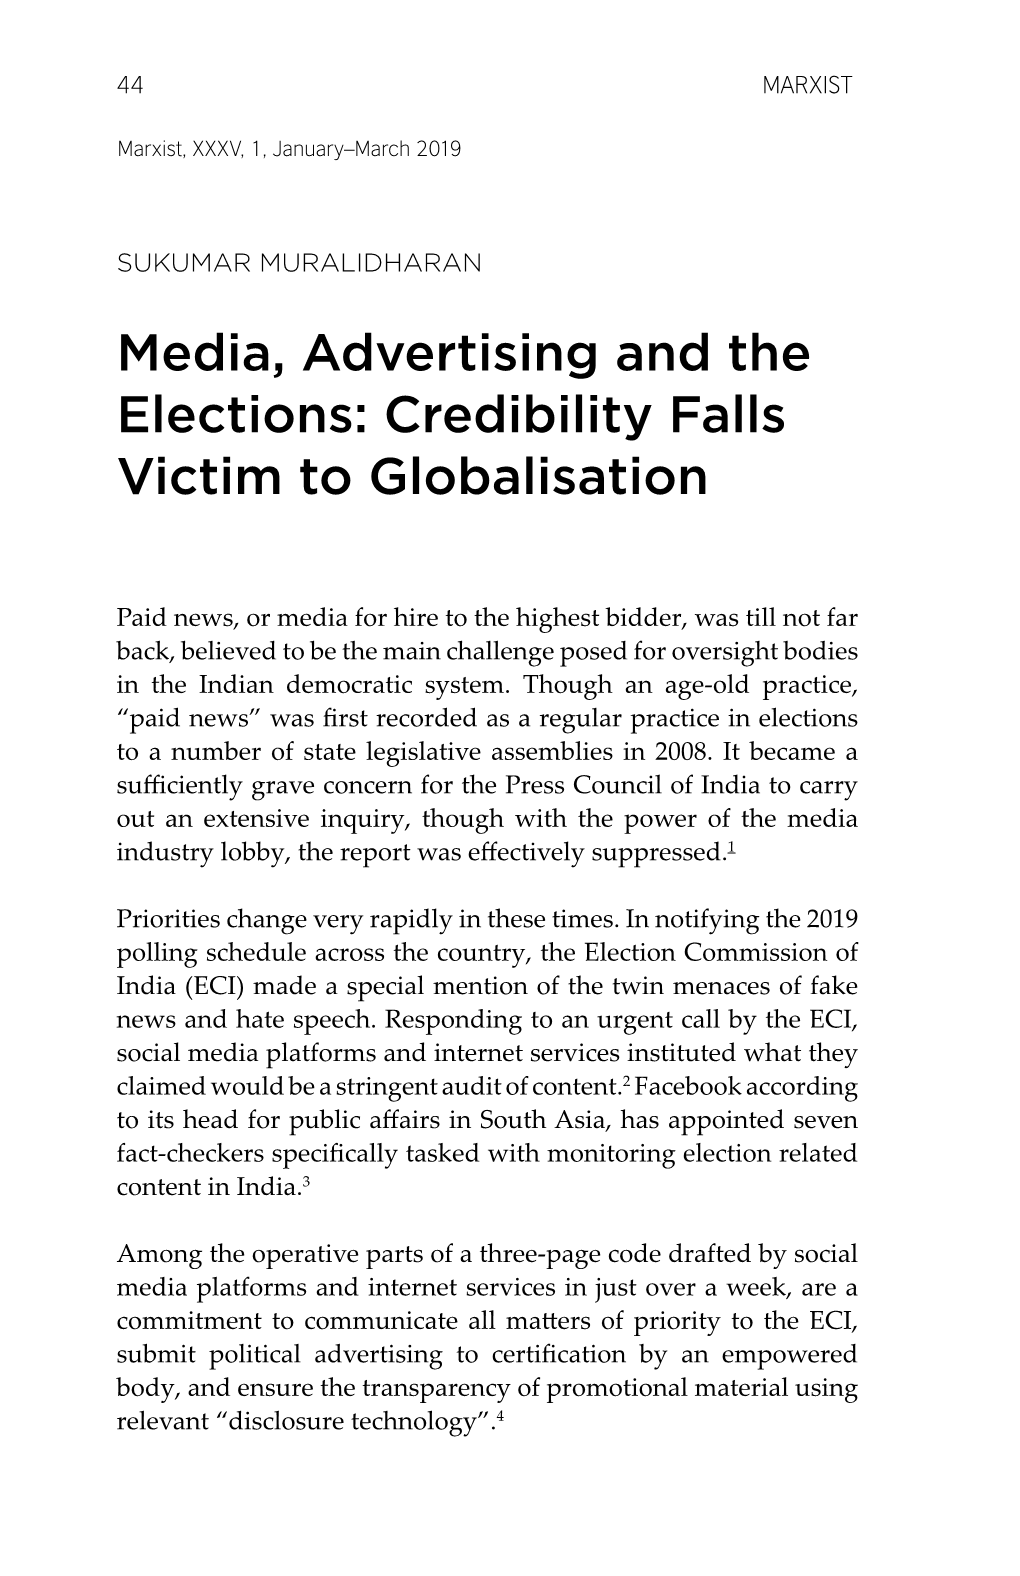 Media, Advertising and the Elections: Credibility Falls Victim to Globalisation